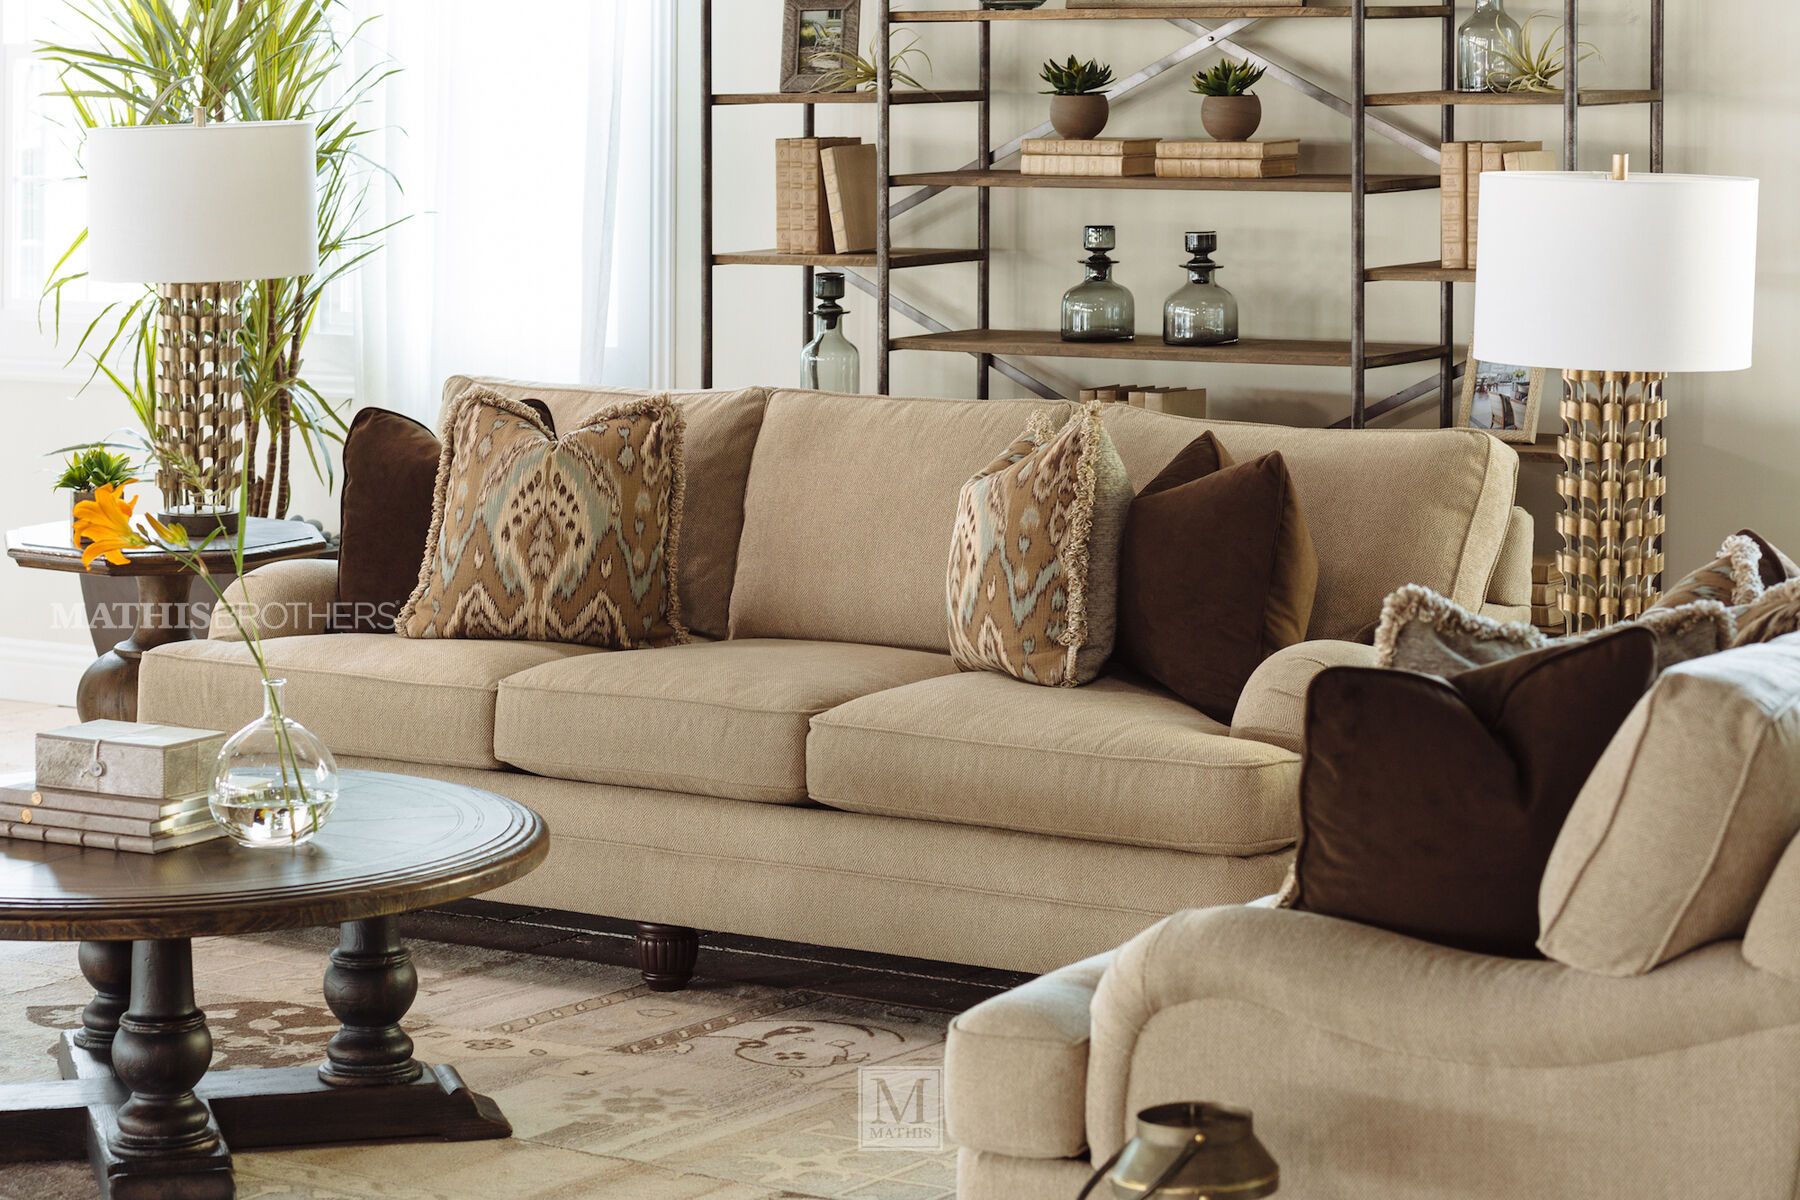 Casual 96.5" Textured Sofa In Beige | Mathis Brothers Furniture Within Sofas In Beige (Gallery 5 of 20)